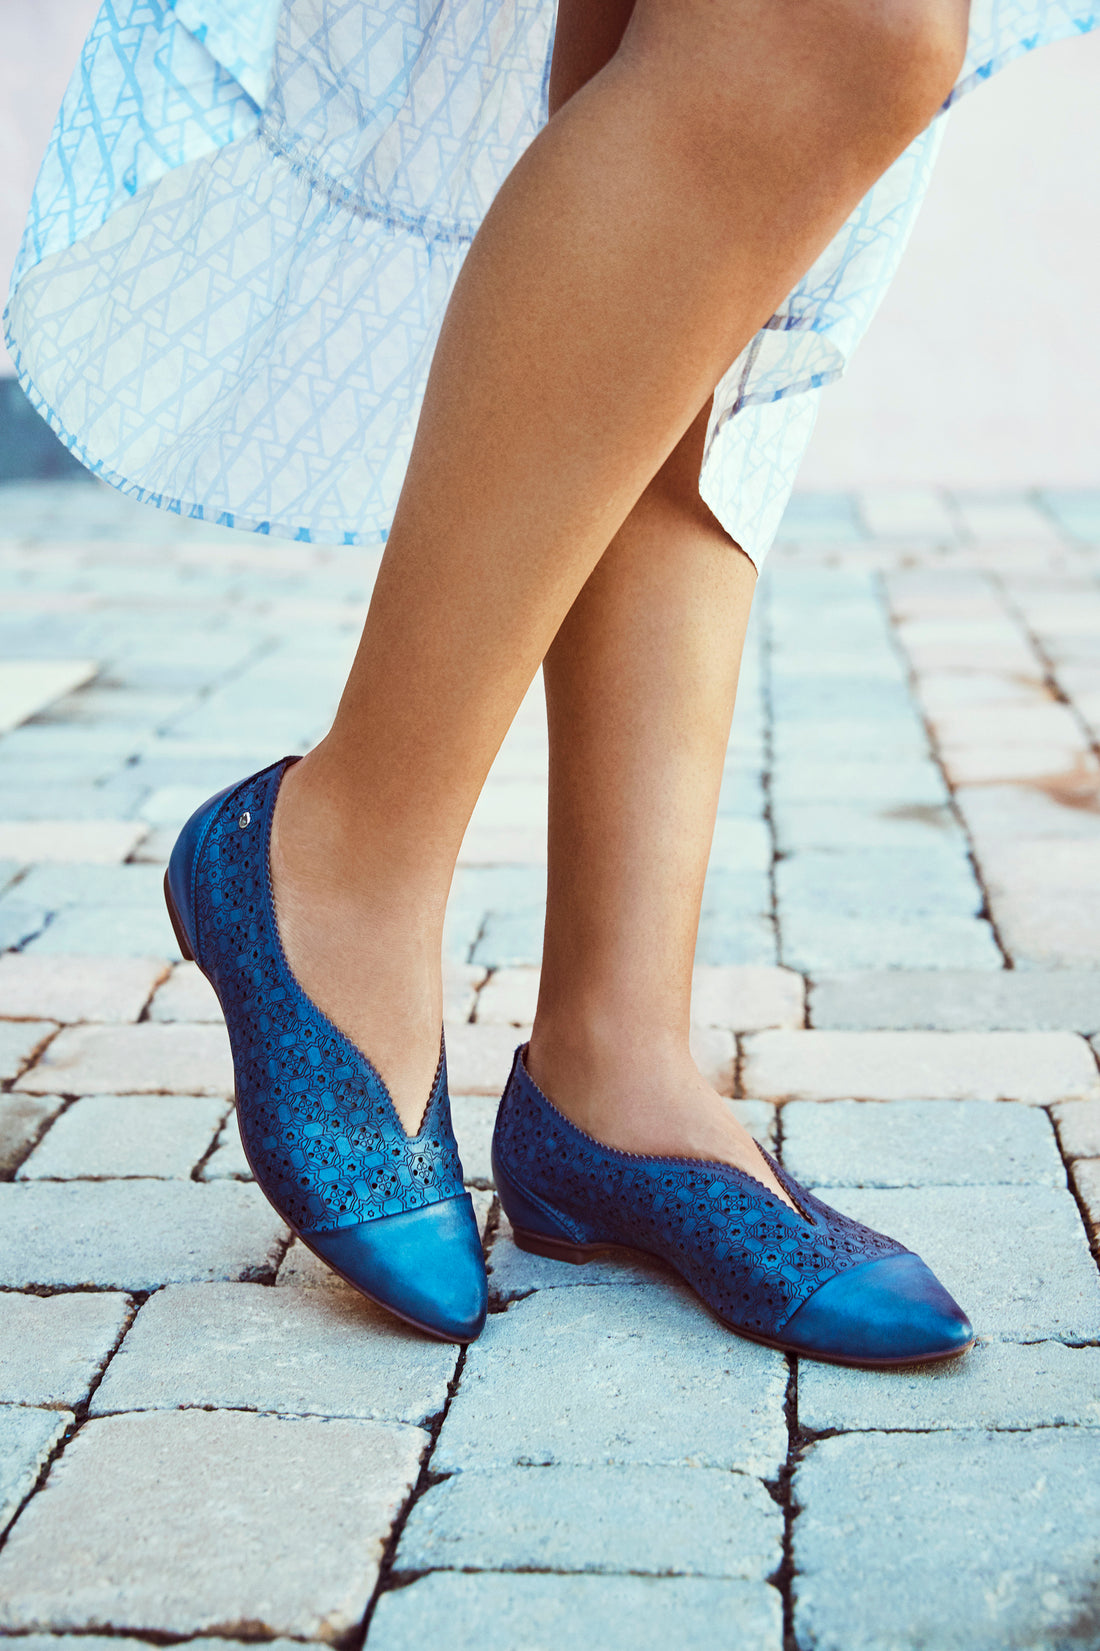 If the Shoe Fits, Buy it: Expert Advice on Finding Your Perfect Fitting Shoe